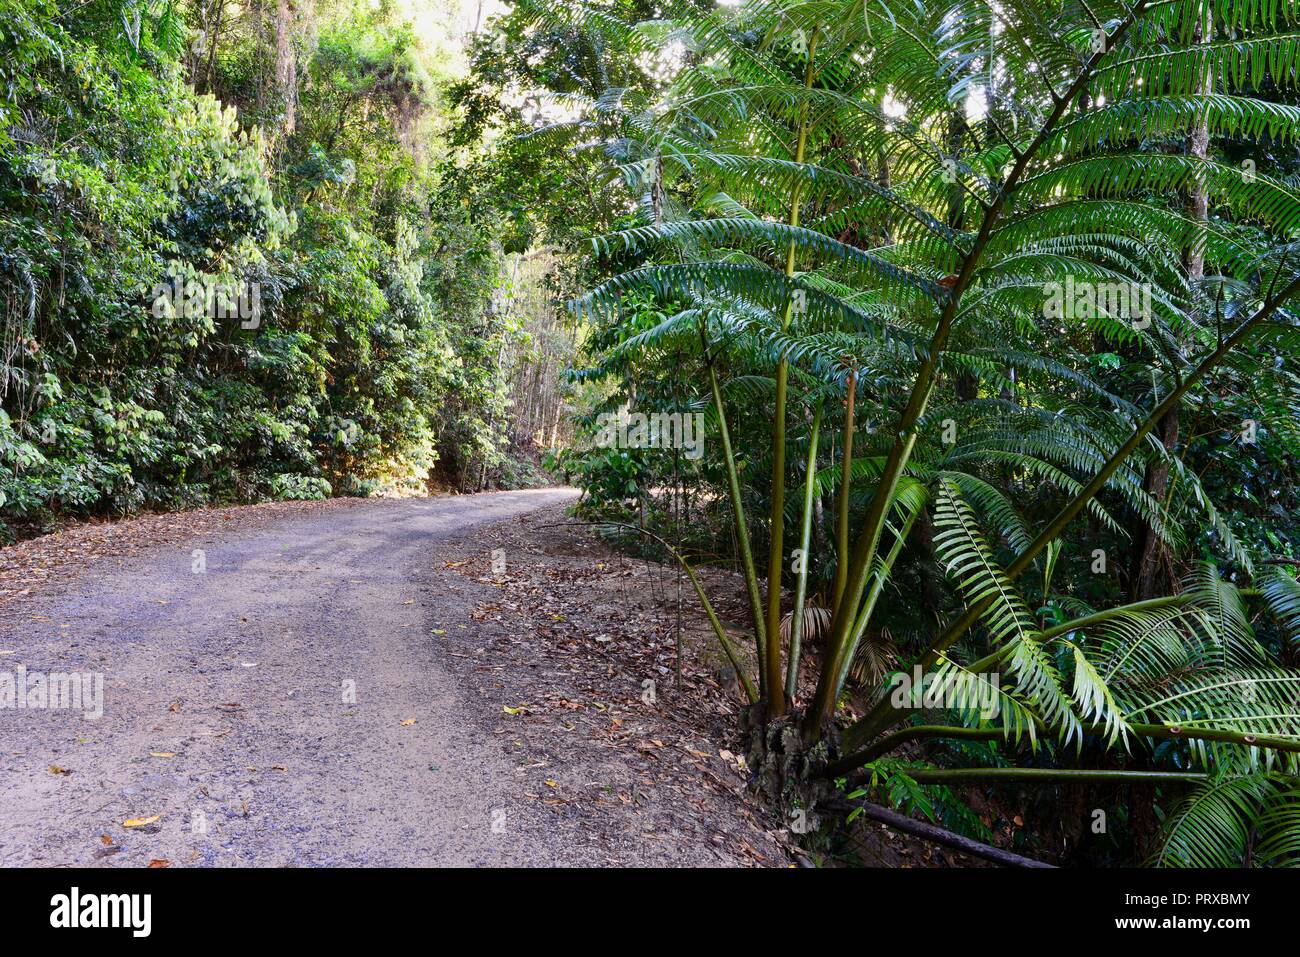 A gravel road through a rainforest with a giant tree fern Angiopteris evecta, South Johnstone camping area, Wooroonooran National Park, Queensland Stock Photo